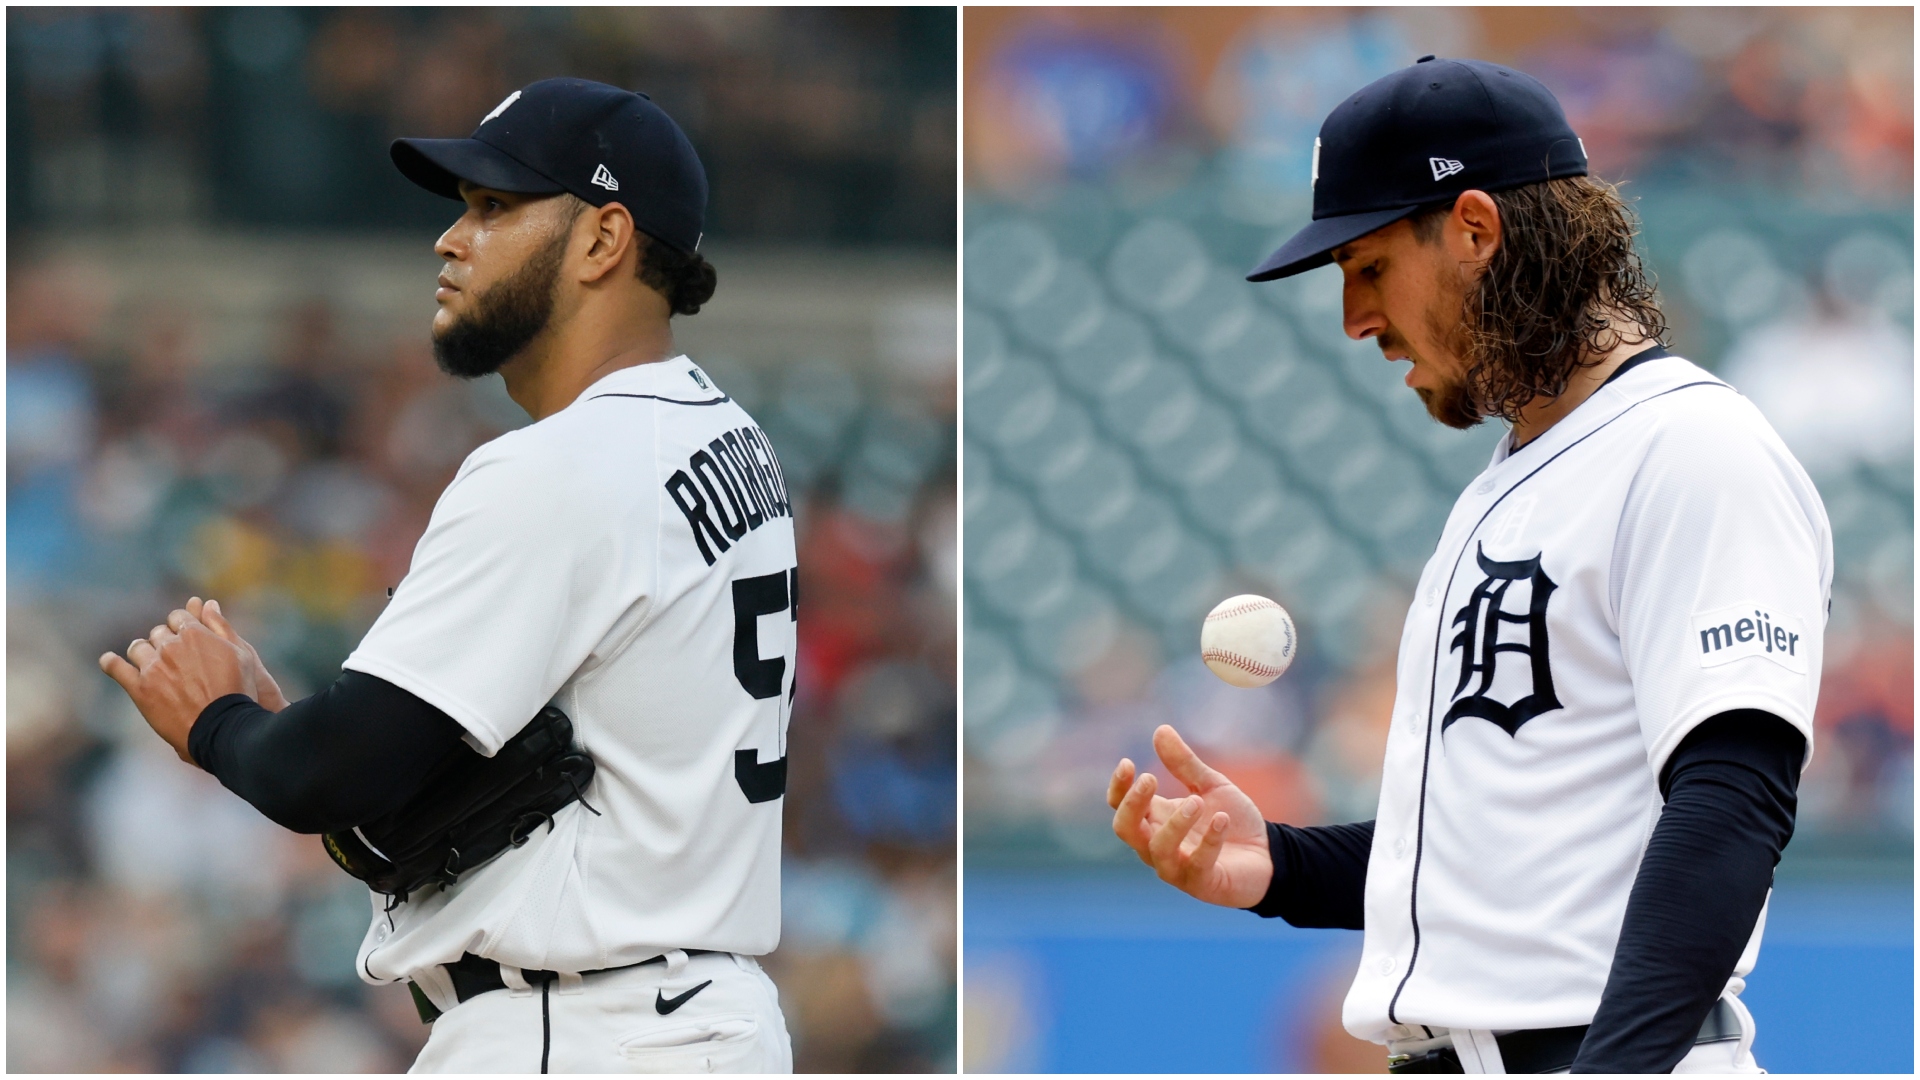 Rodriguez returns, Greene homers as Tigers shut out Angels